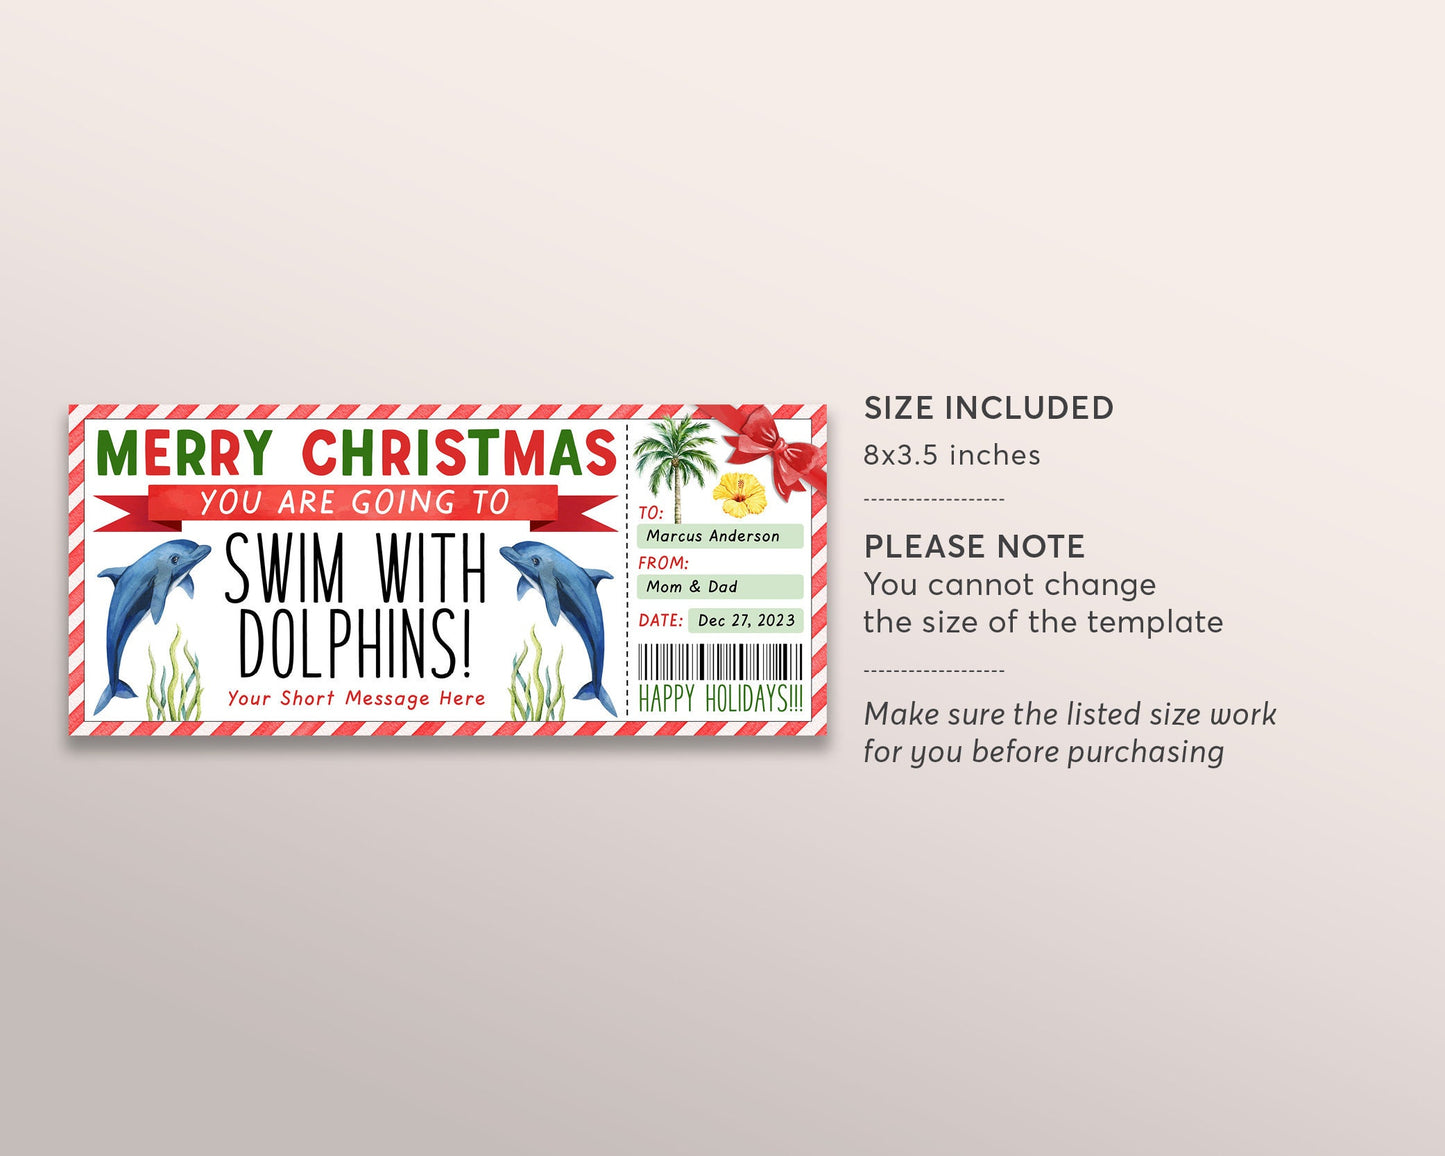 Christmas Swim With Dolphins Ticket Editable Template, Surprise Dolphin Watching Experience Gift Voucher Day Trip Gift Certificate Coupon